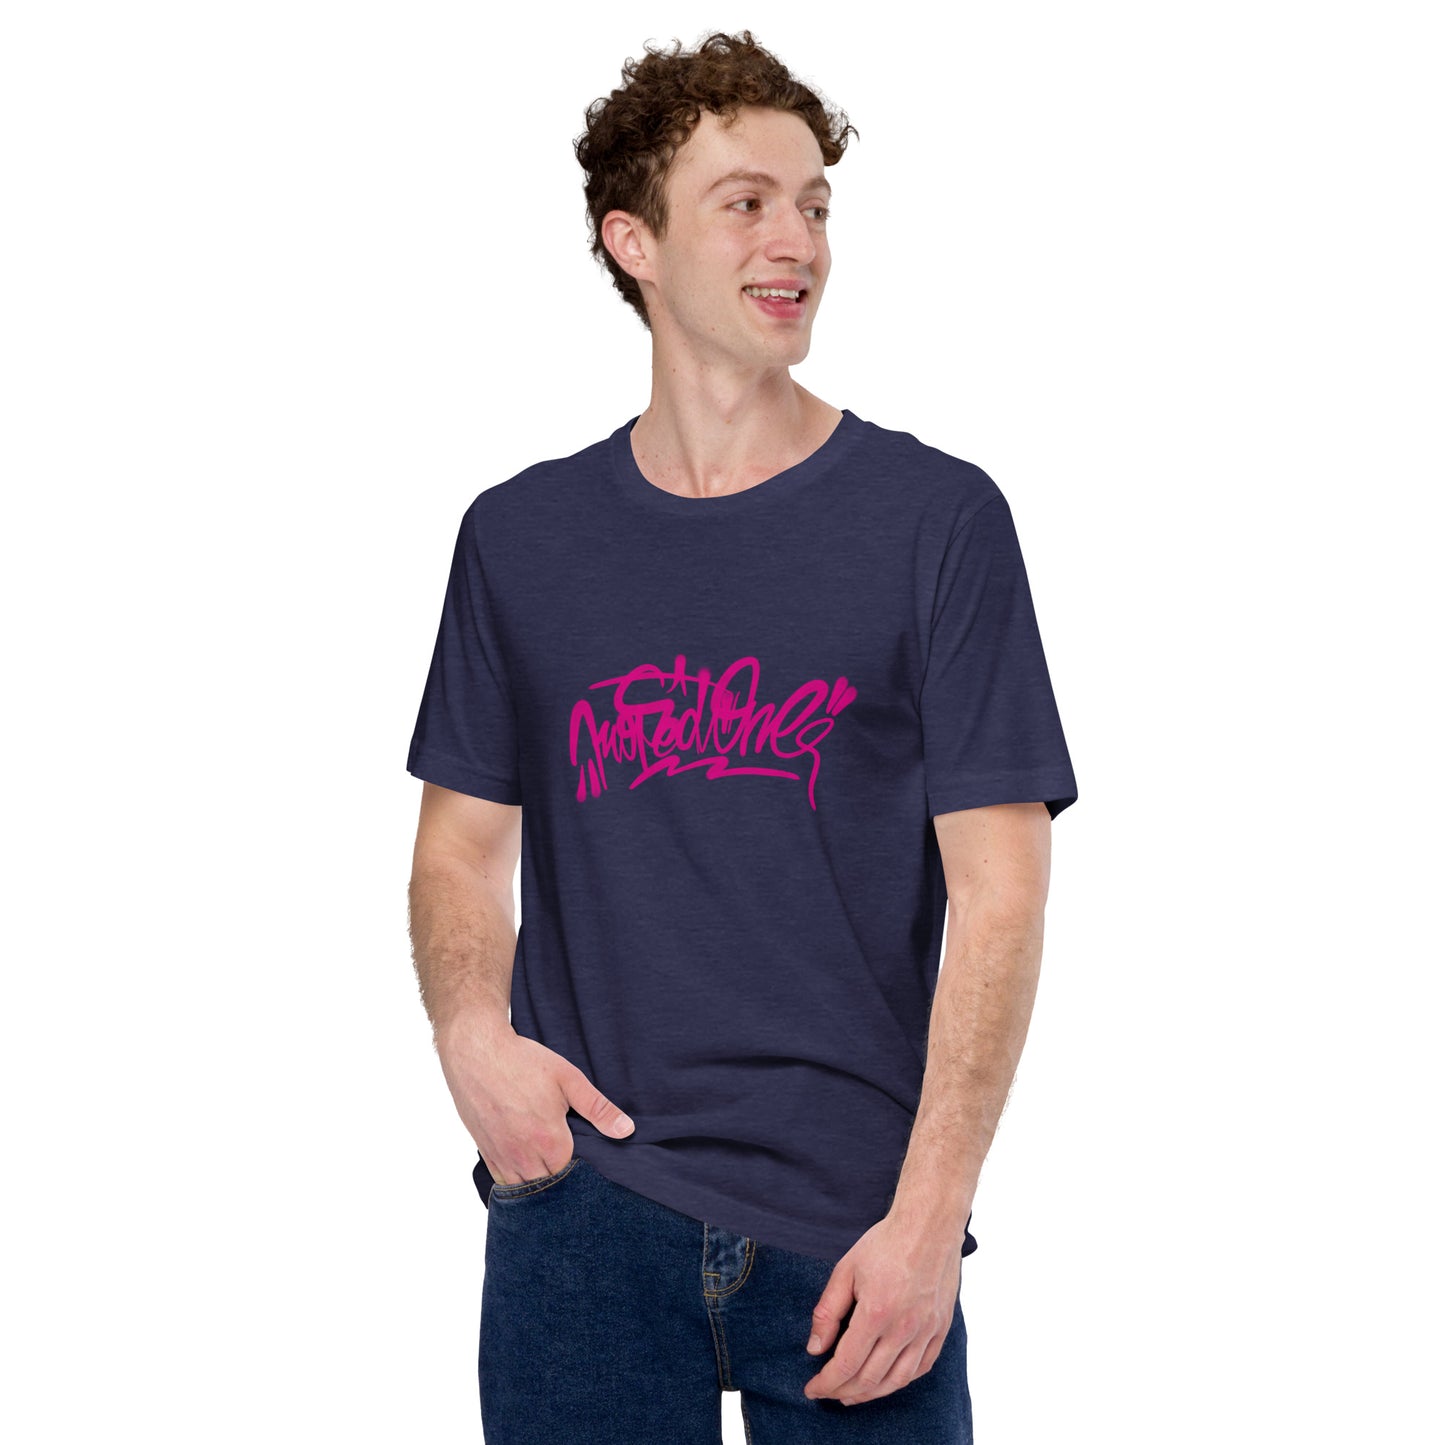 Moped-one loose fit unisex Shirt navy